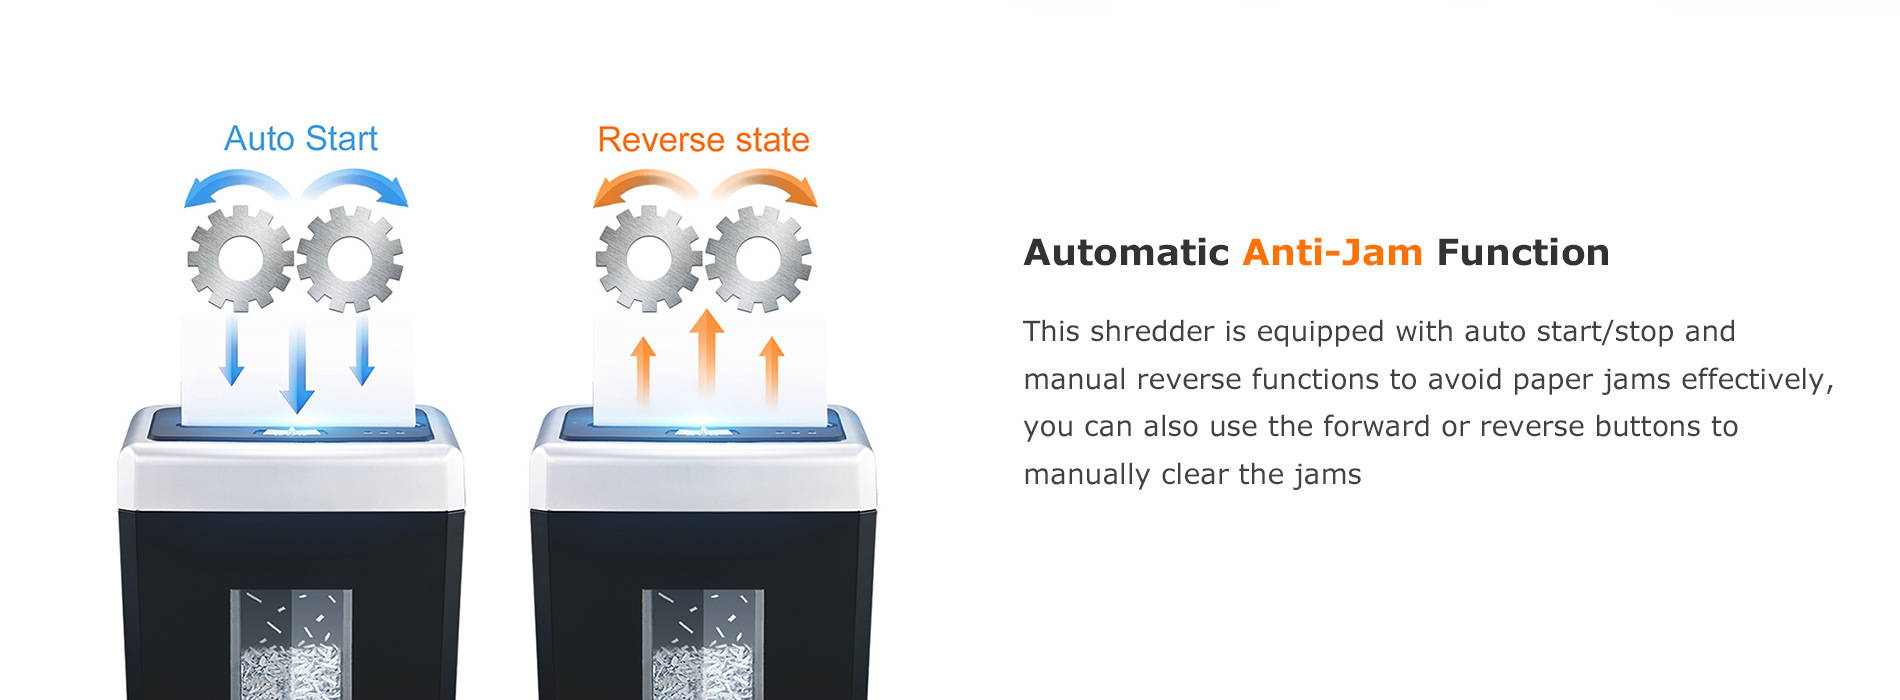 Automatic Anti-Jam Function This shredder is equipped with auto start/stop and manual reverse functions to avoid paper jams effectively, you can also use the forward or reverse buttons to manually clear the jams